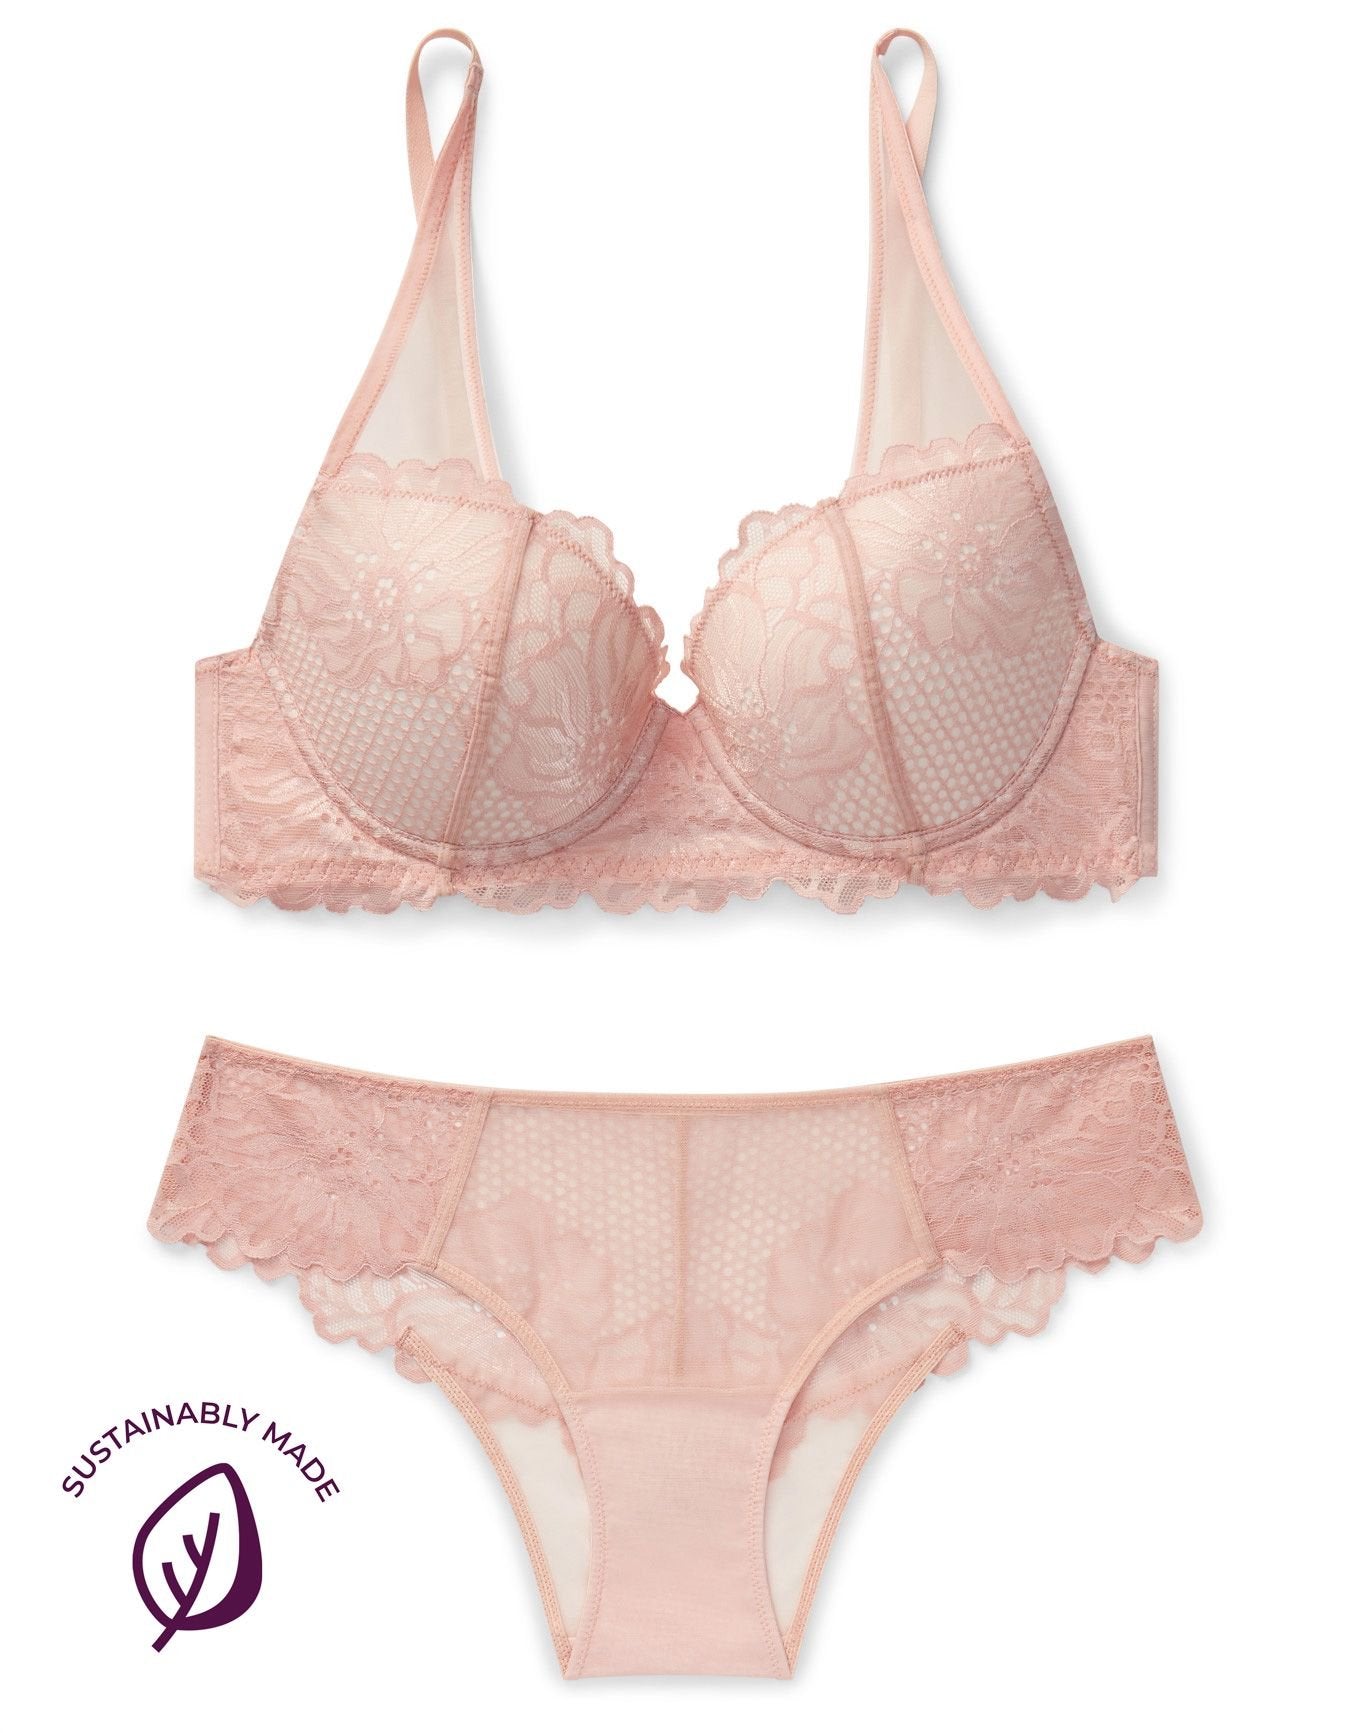 Adore Me Magdalena Push-Up Demi in color Peachy Keen (Peachy Keen) and shape demi